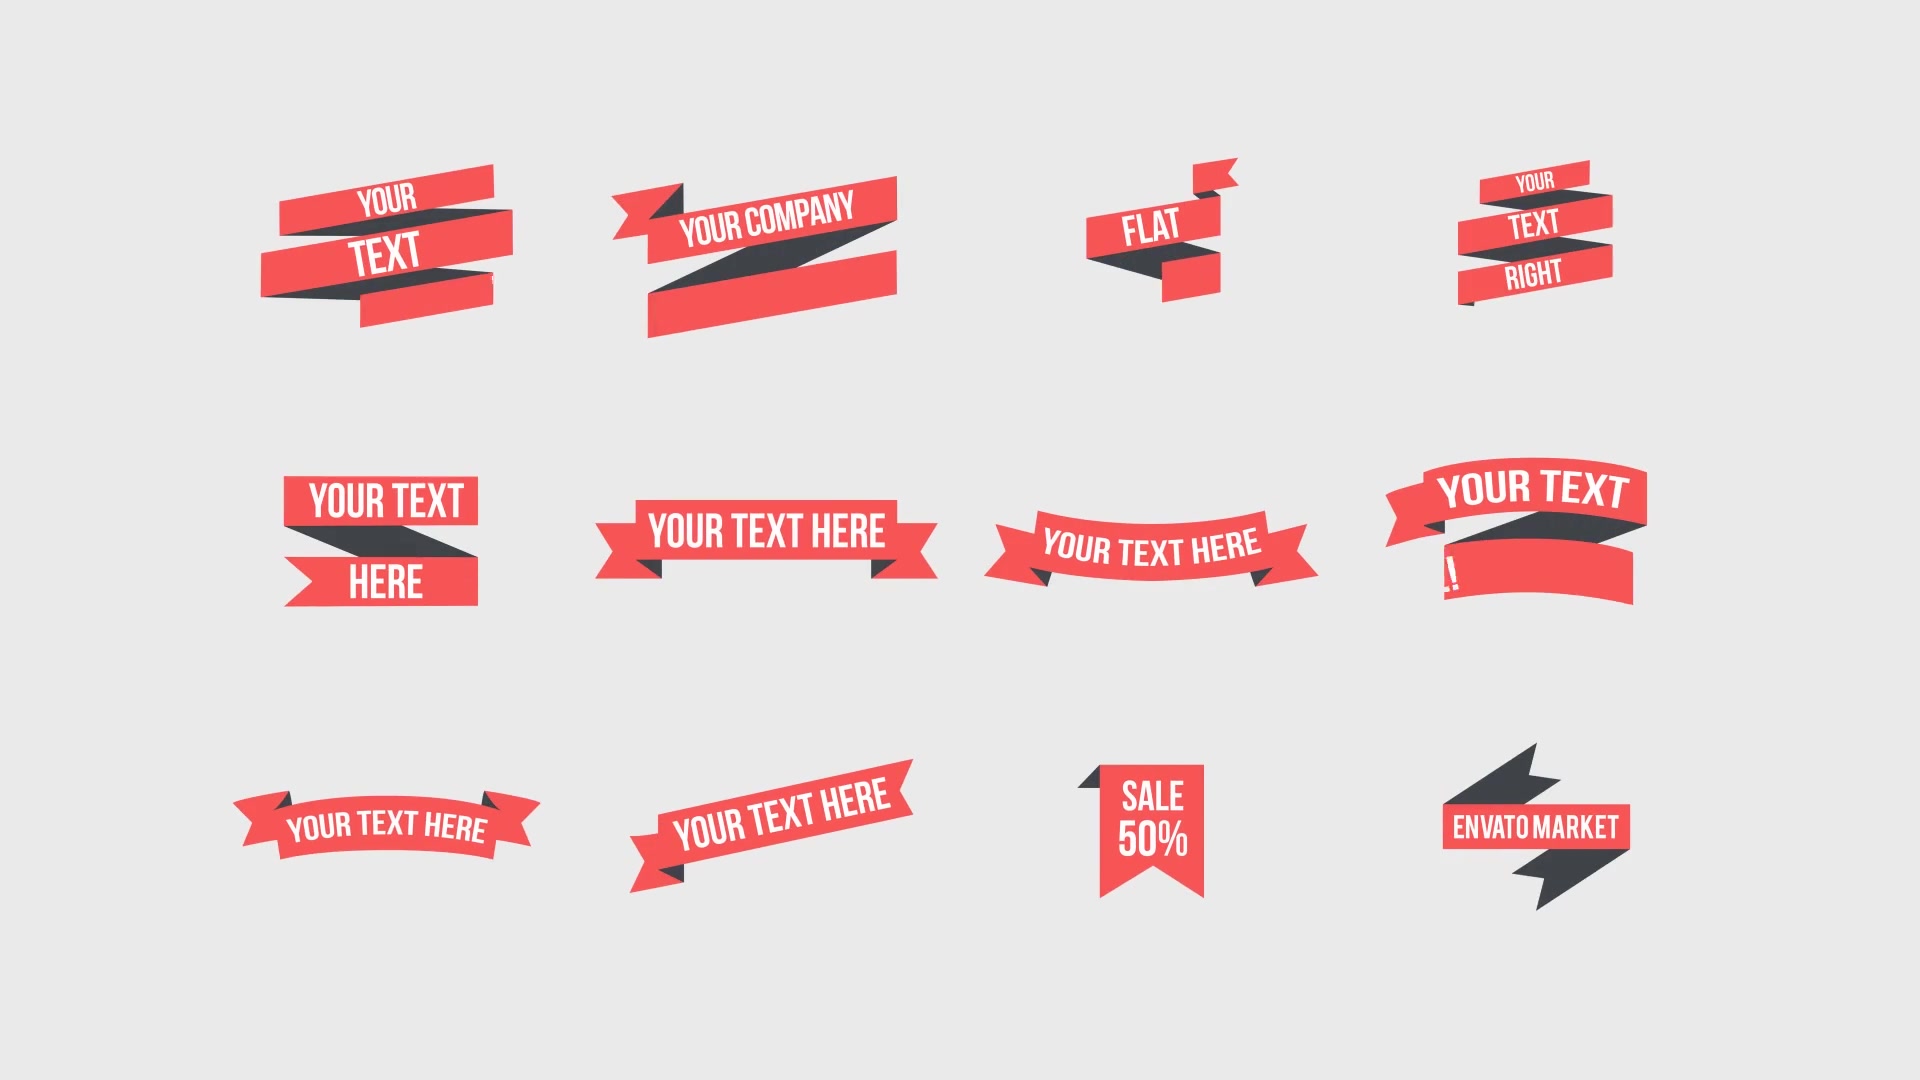 Animated Flat Ribbon - Download Videohive 12881502